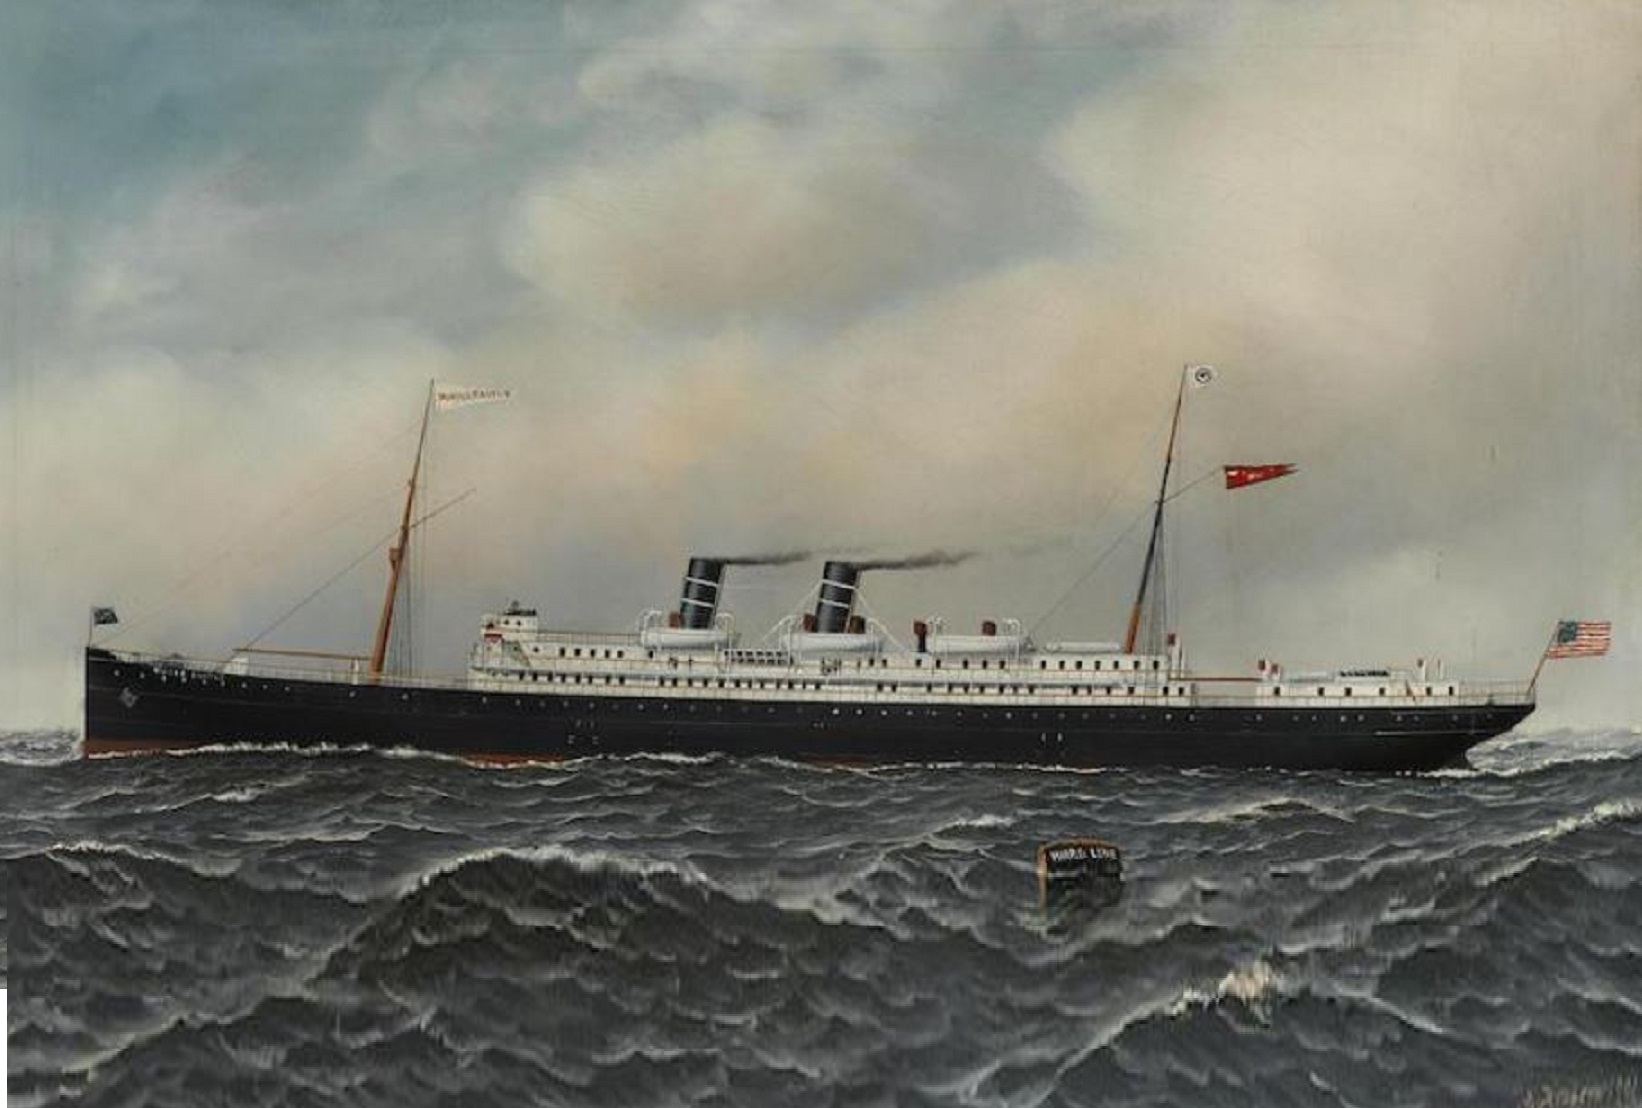 <p>In 1934, the S.S. Morro Castle, carrying 549 passengers and crew, was returning from Cuba to New York when numerous things started to go wrong.</p>